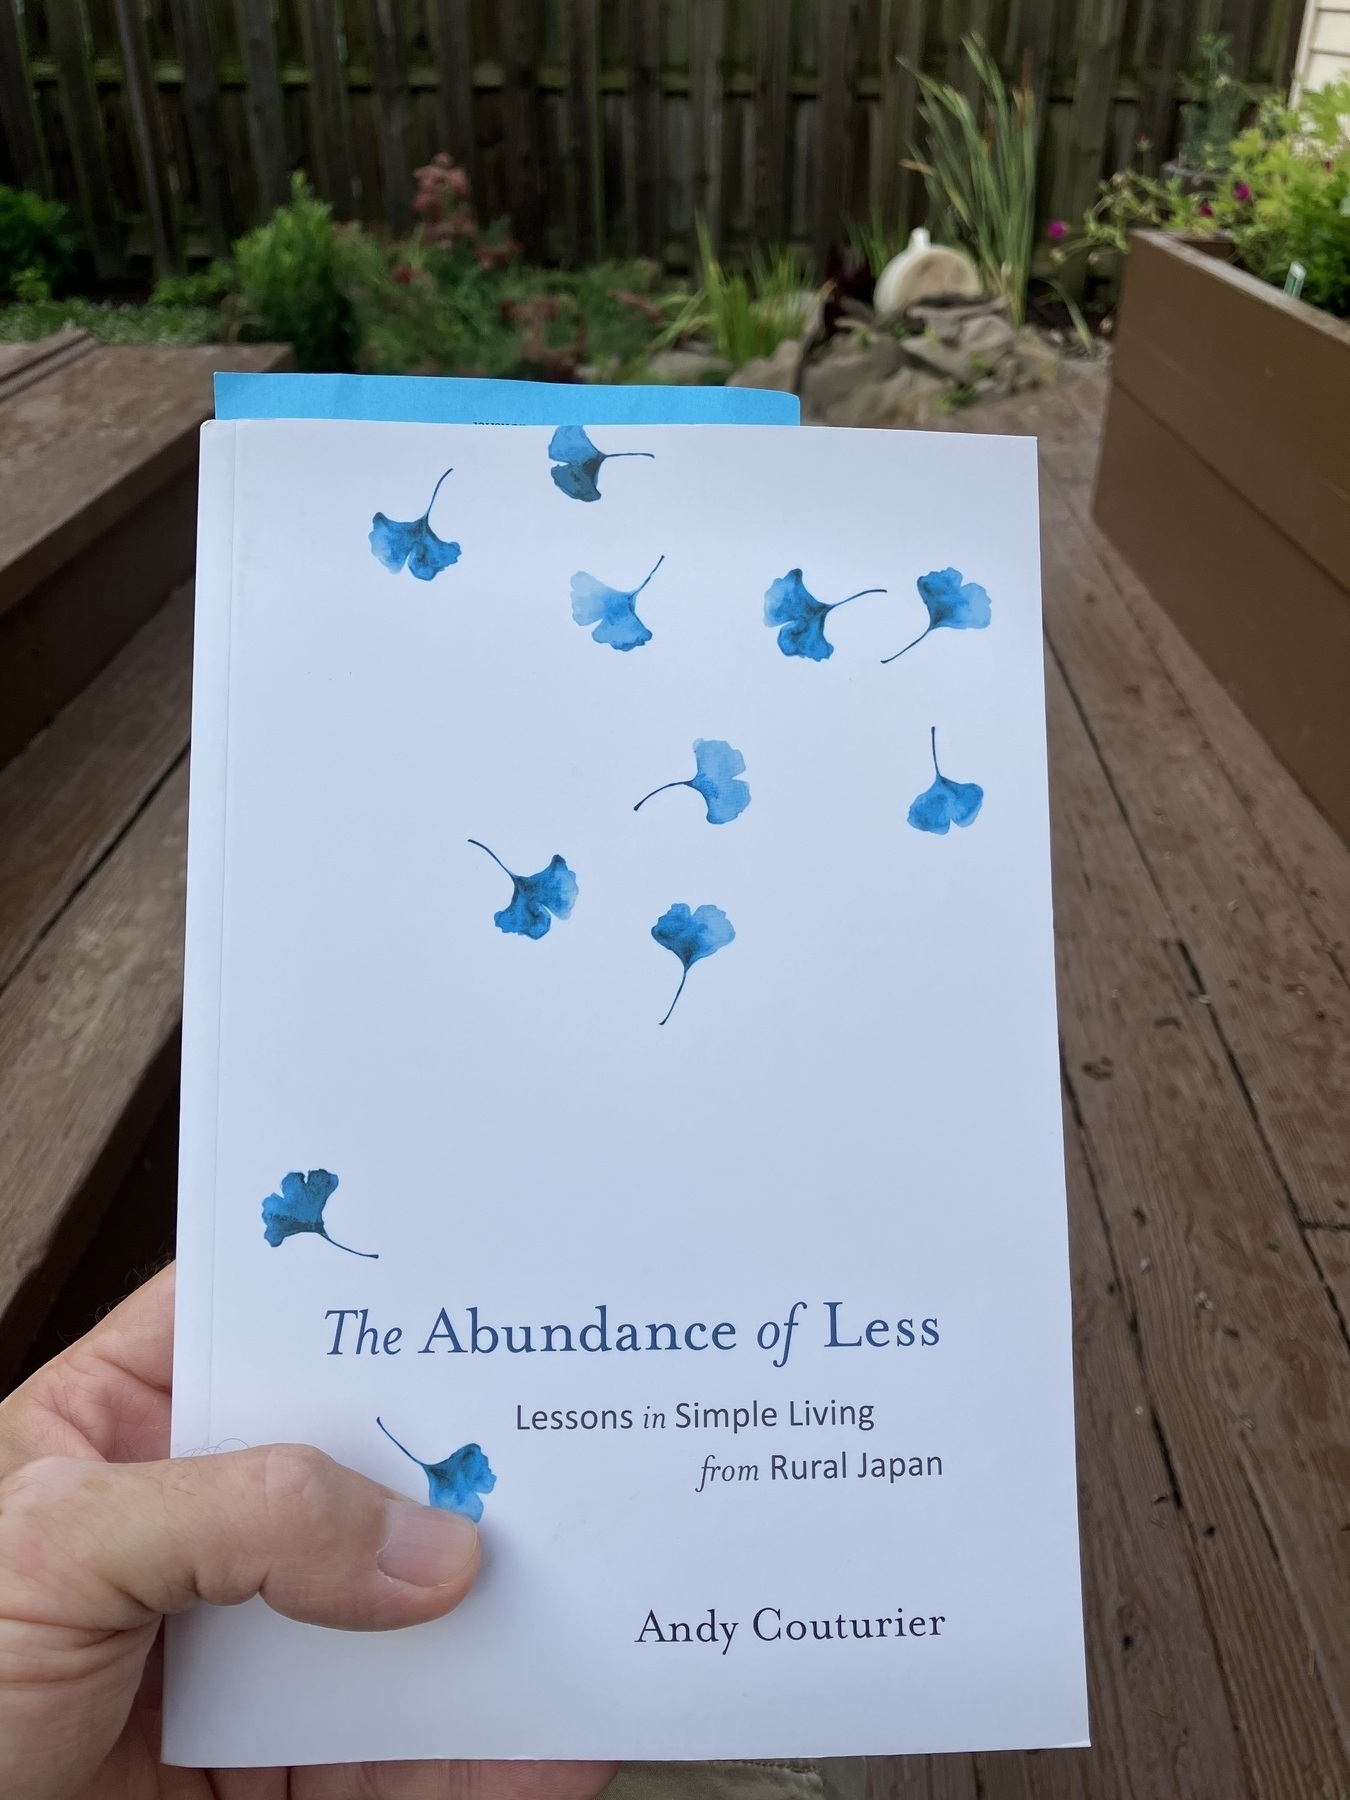 Cover of book titled The Abundance of Less with garden in the background.